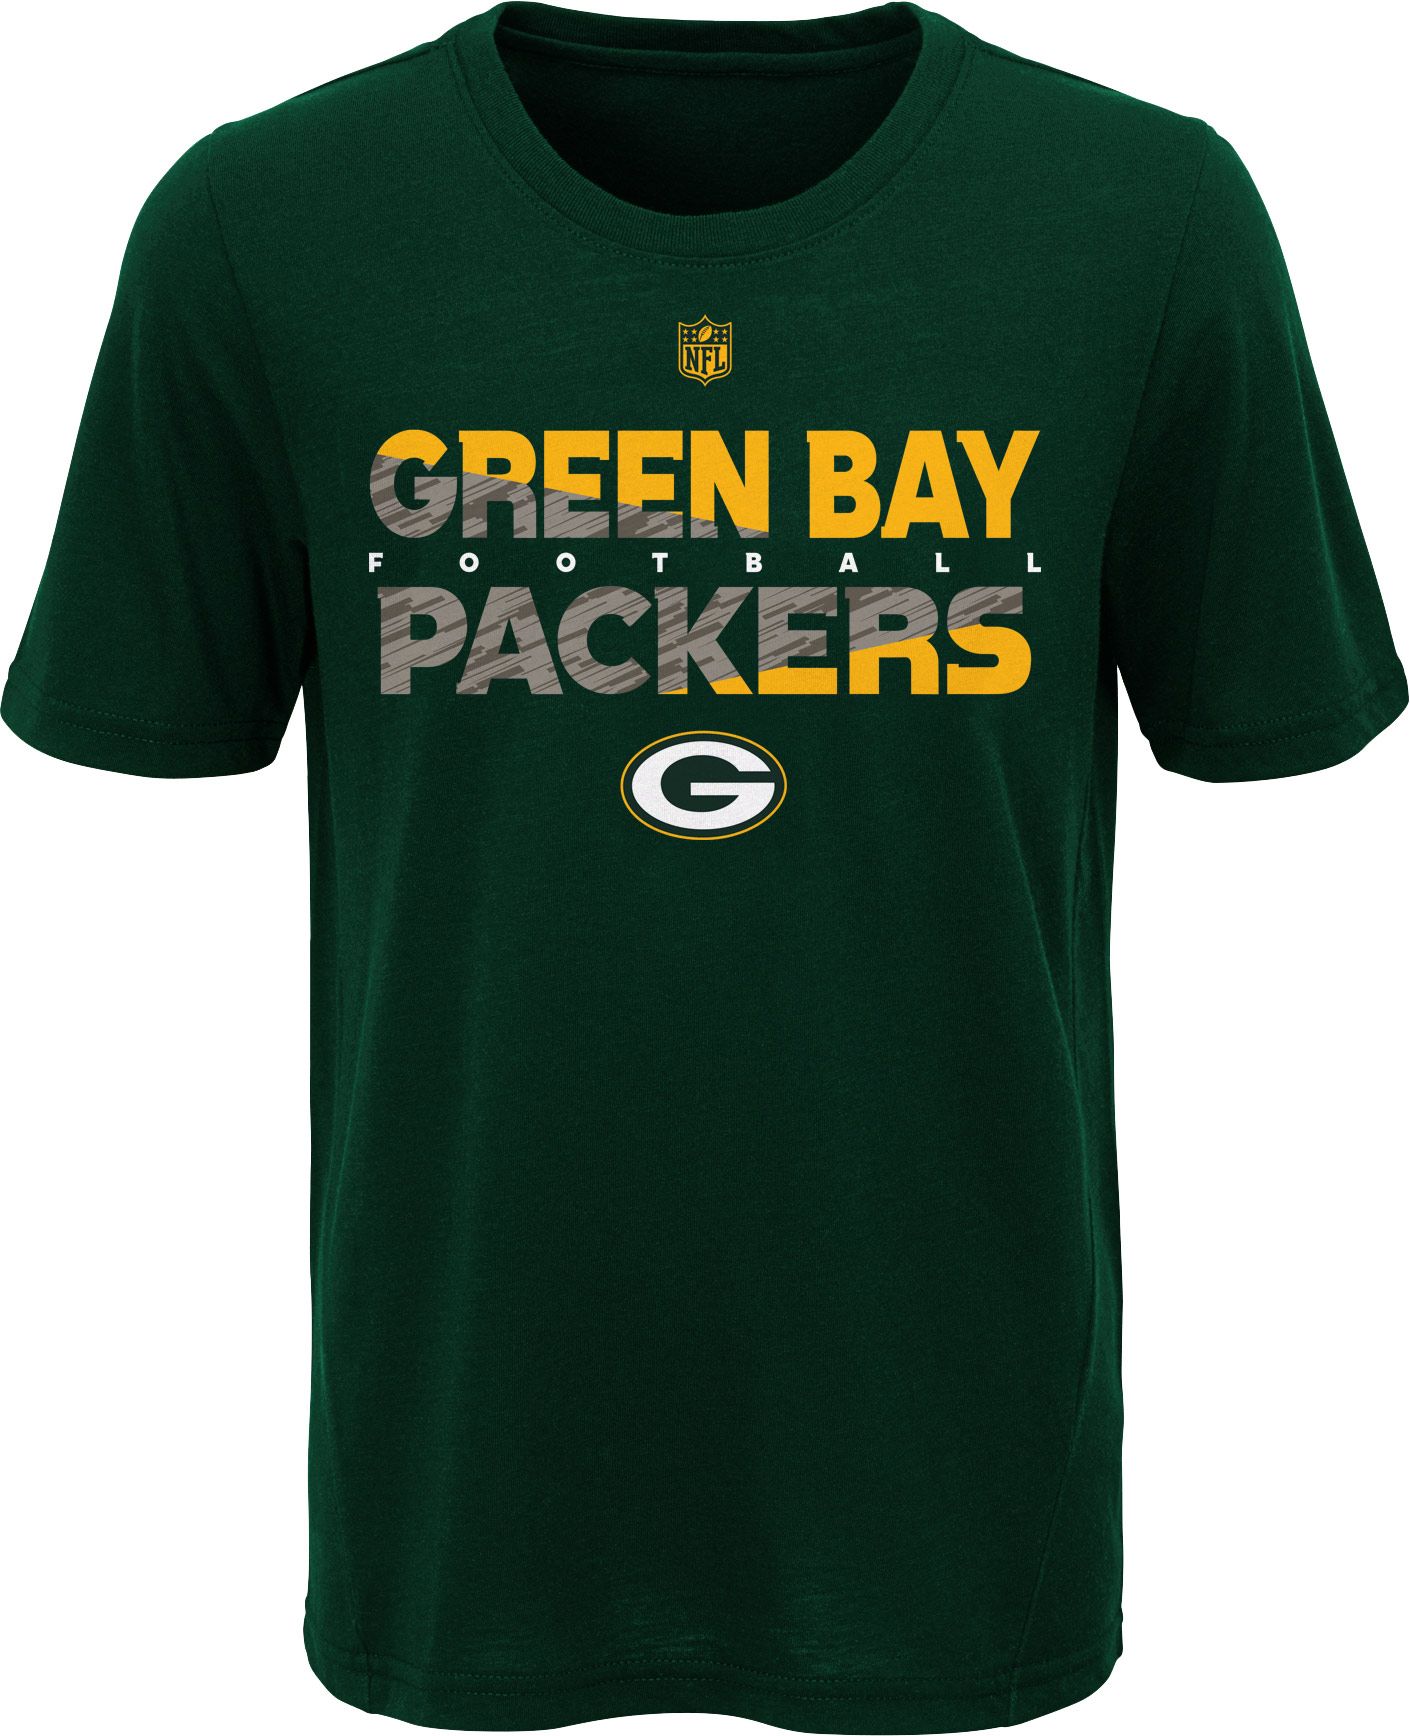 Green Bay Packers Kids Clothing | Best Price Guarantee at DICK'S